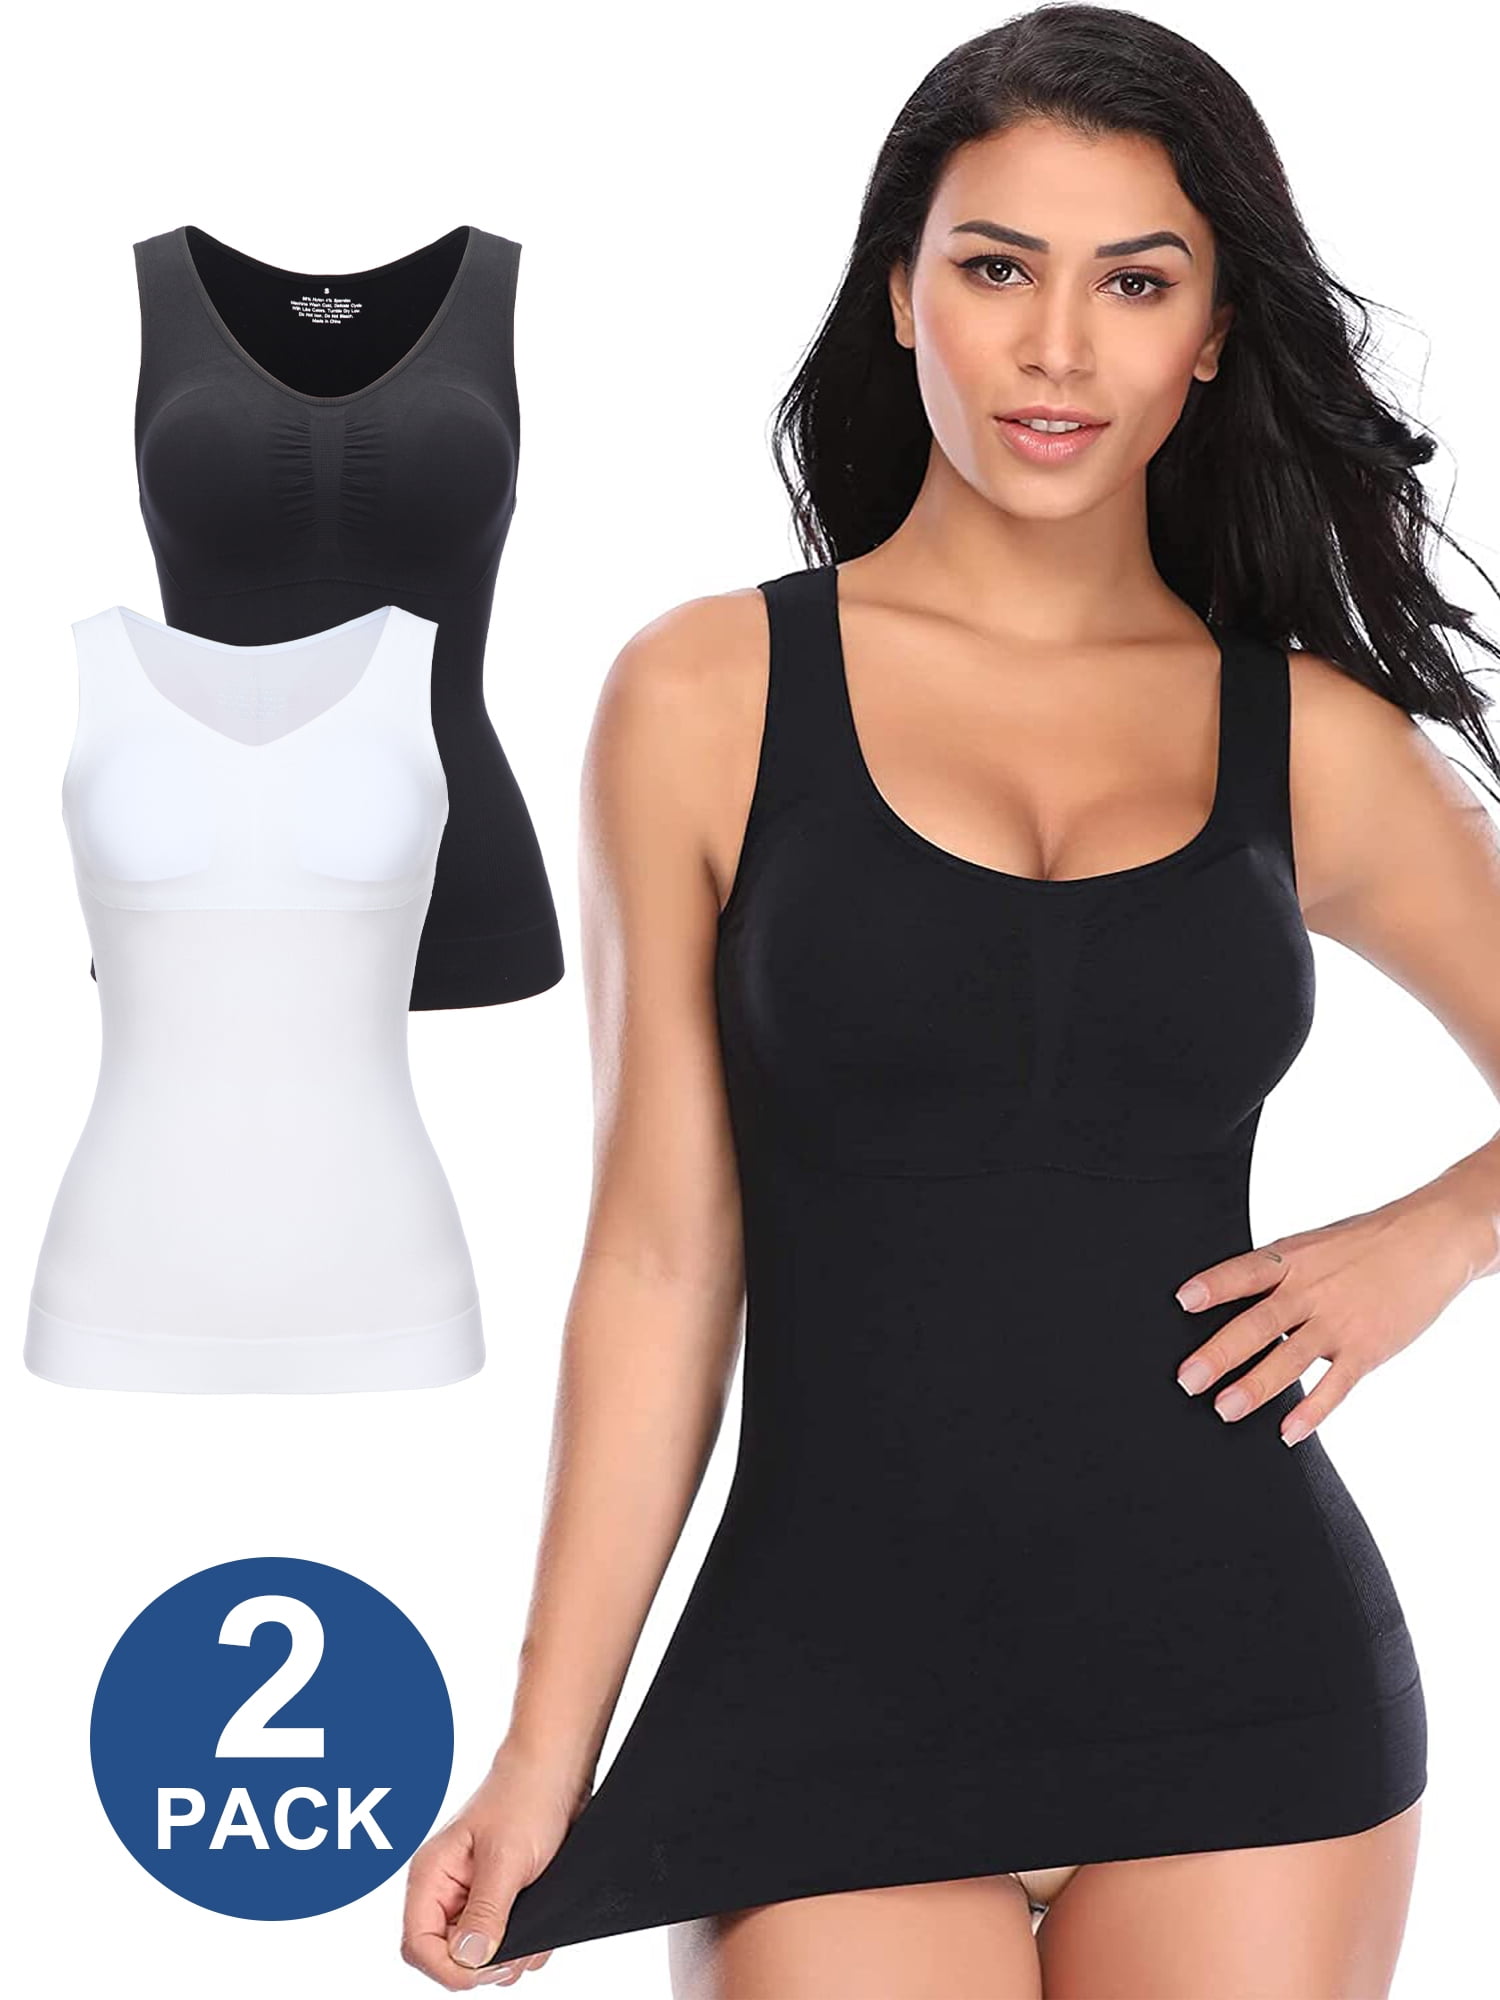 QRIC 3 Pack Tummy Control Camisole for Women Shapewear Tank Tops